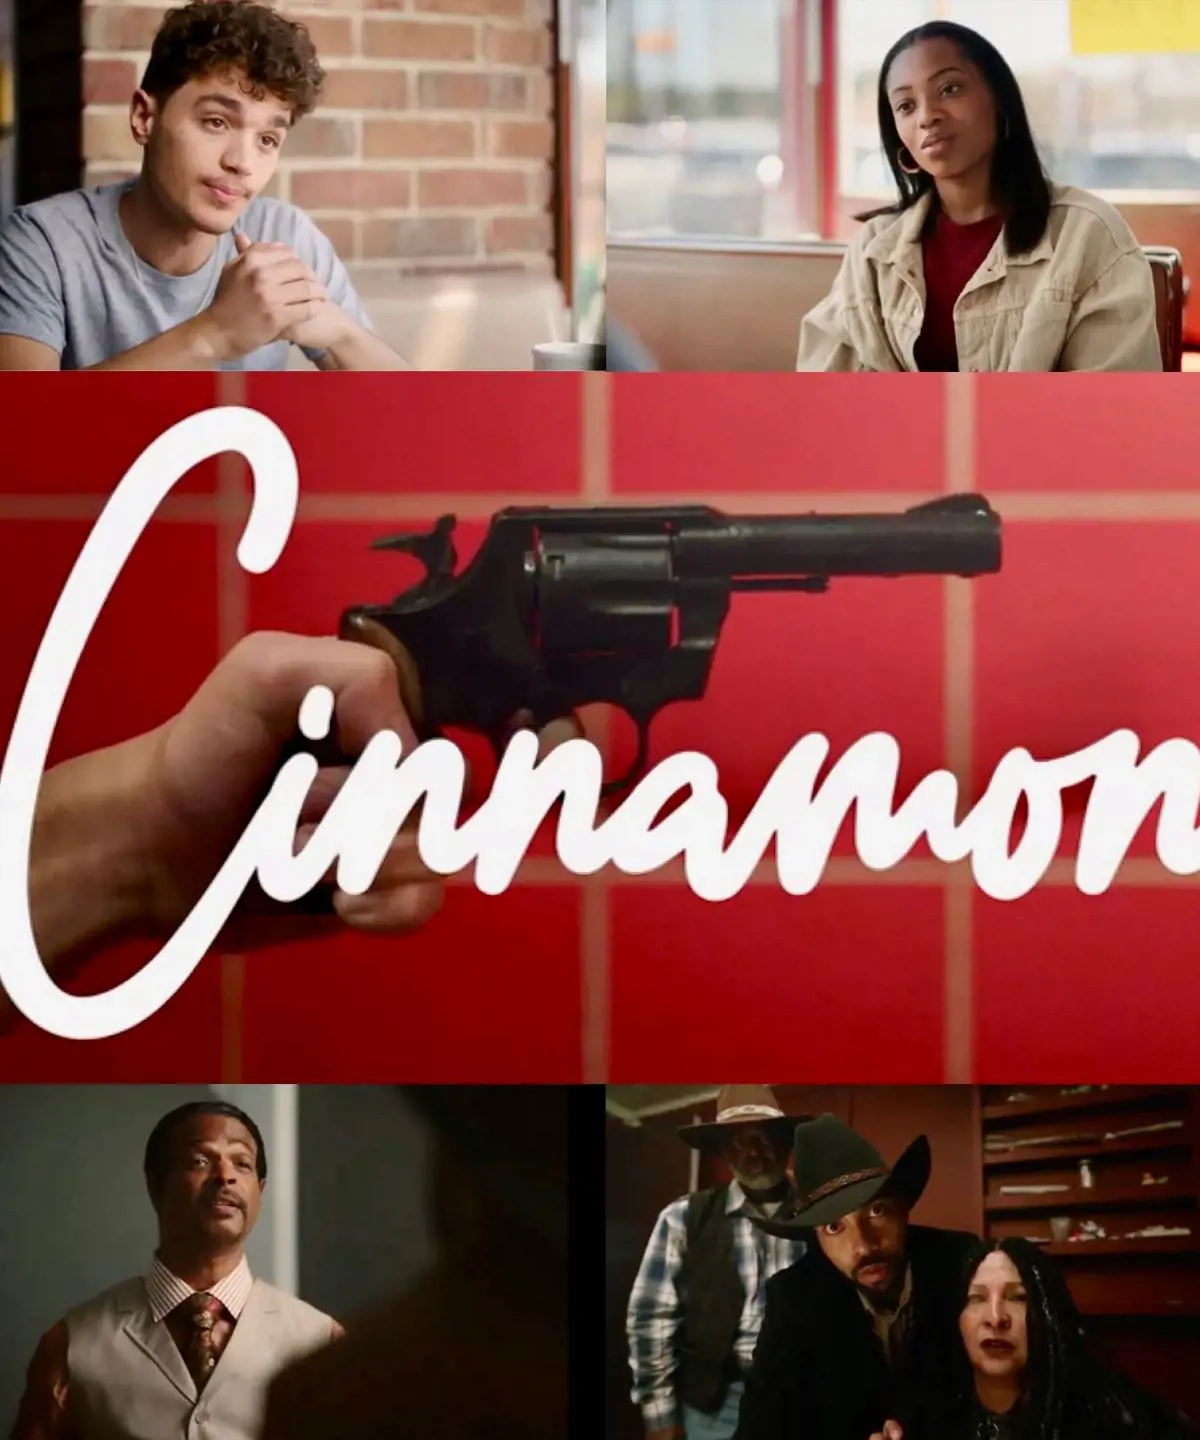 Tubi released the trailer of Cinnamon on April 18, 2023; the Tubi Original will land on June 11